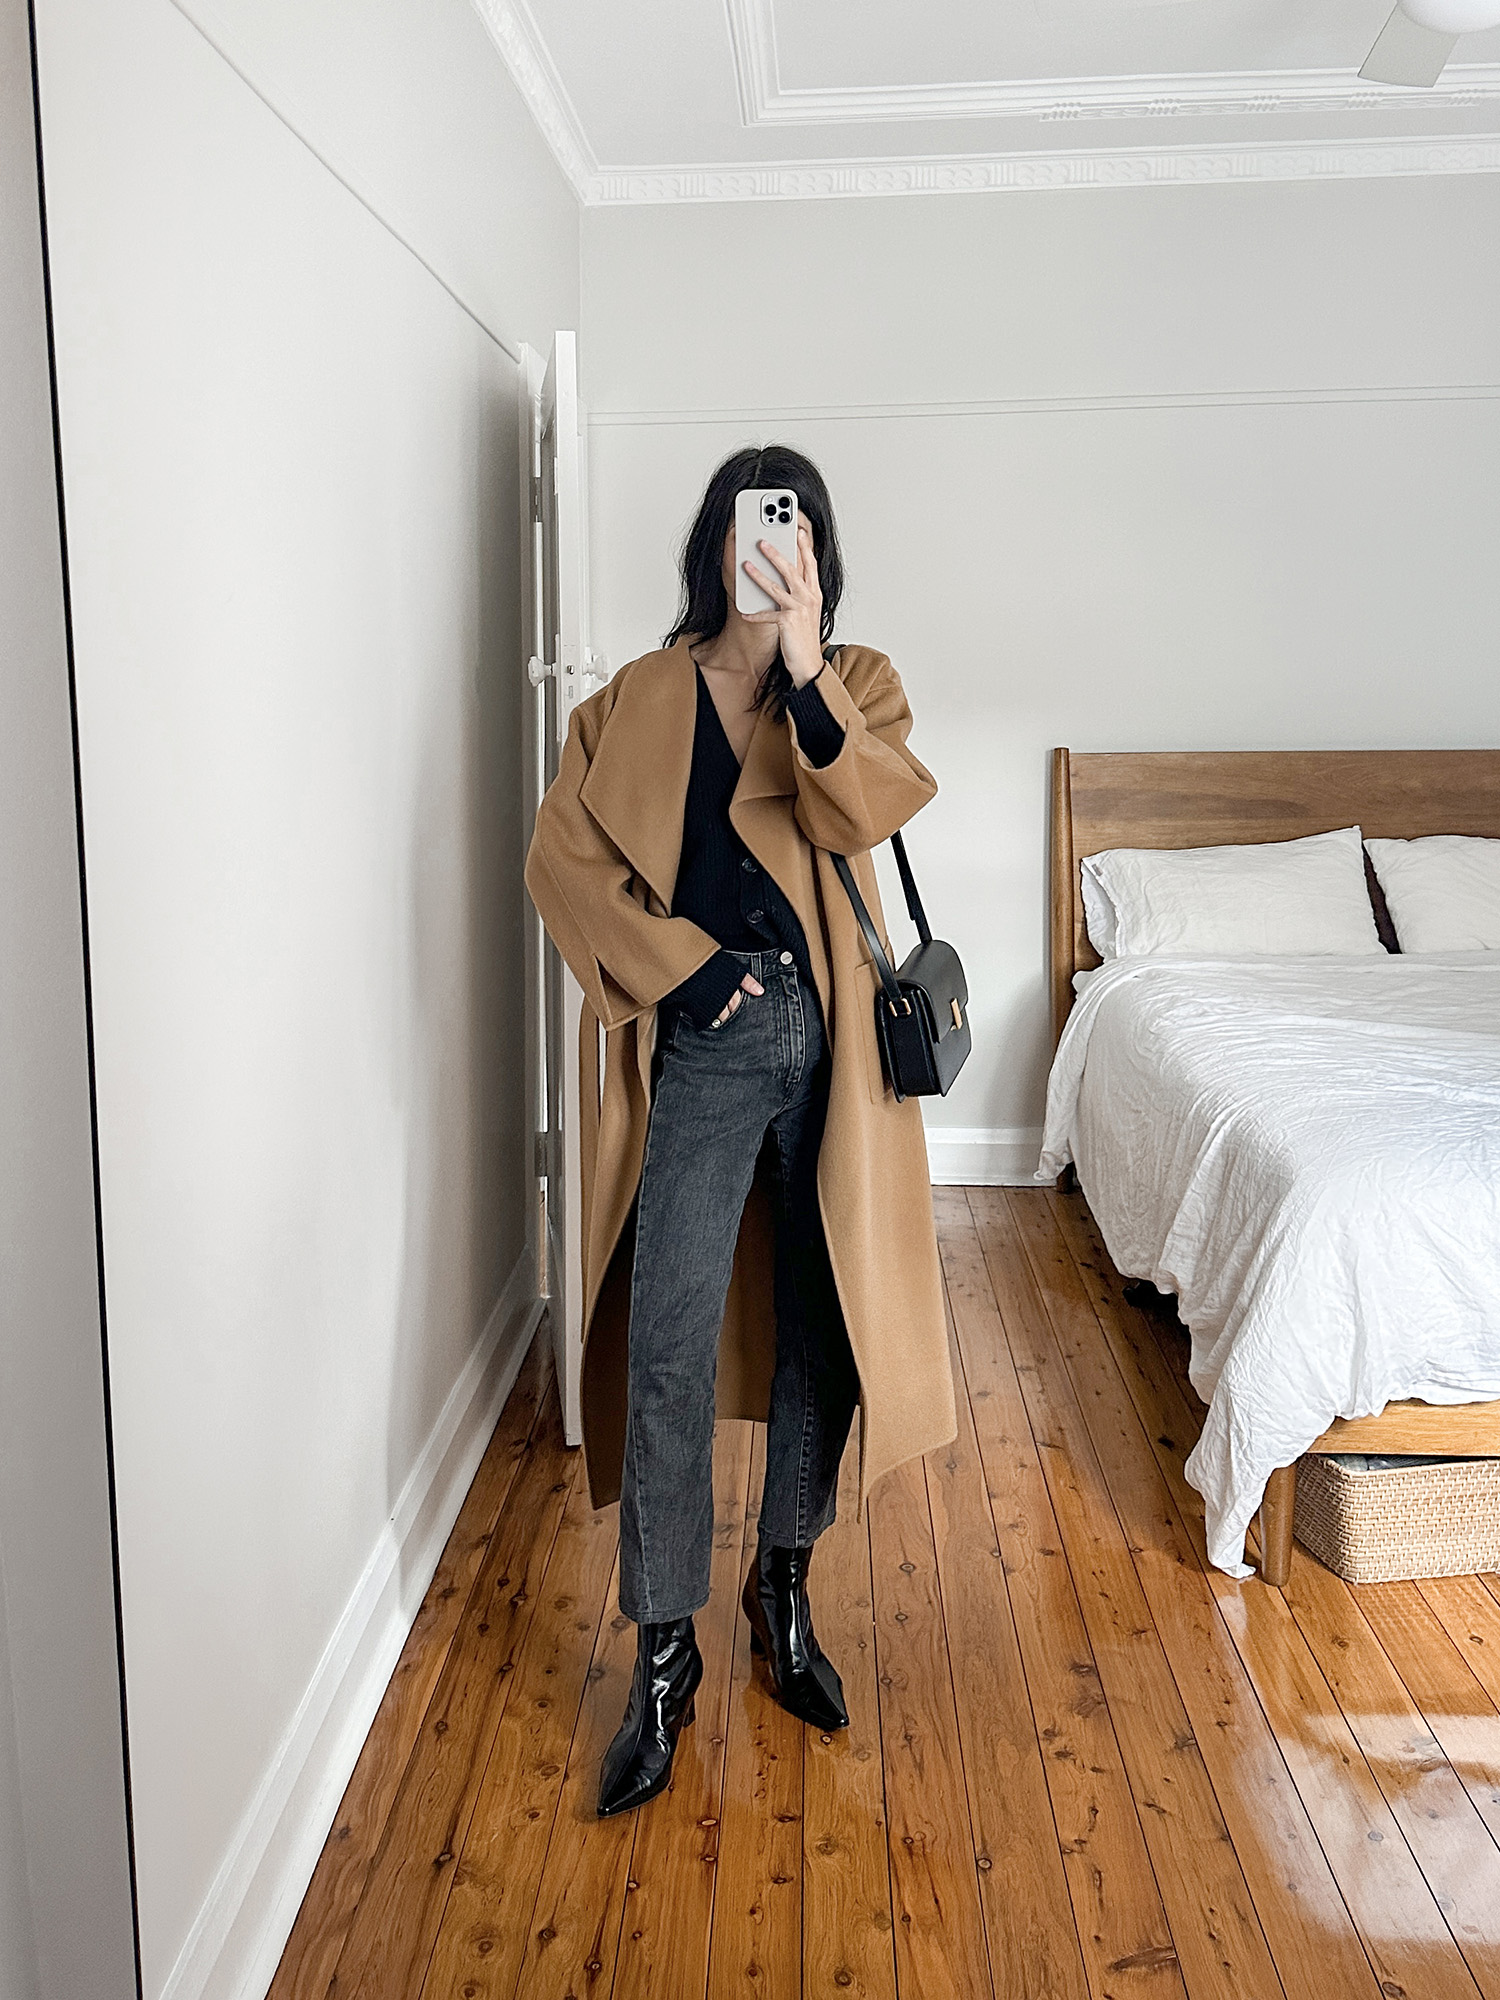 Jenni Kayne cropped cashmere cardigan with Musee coat and Reike Nen boots Scandi style outfit